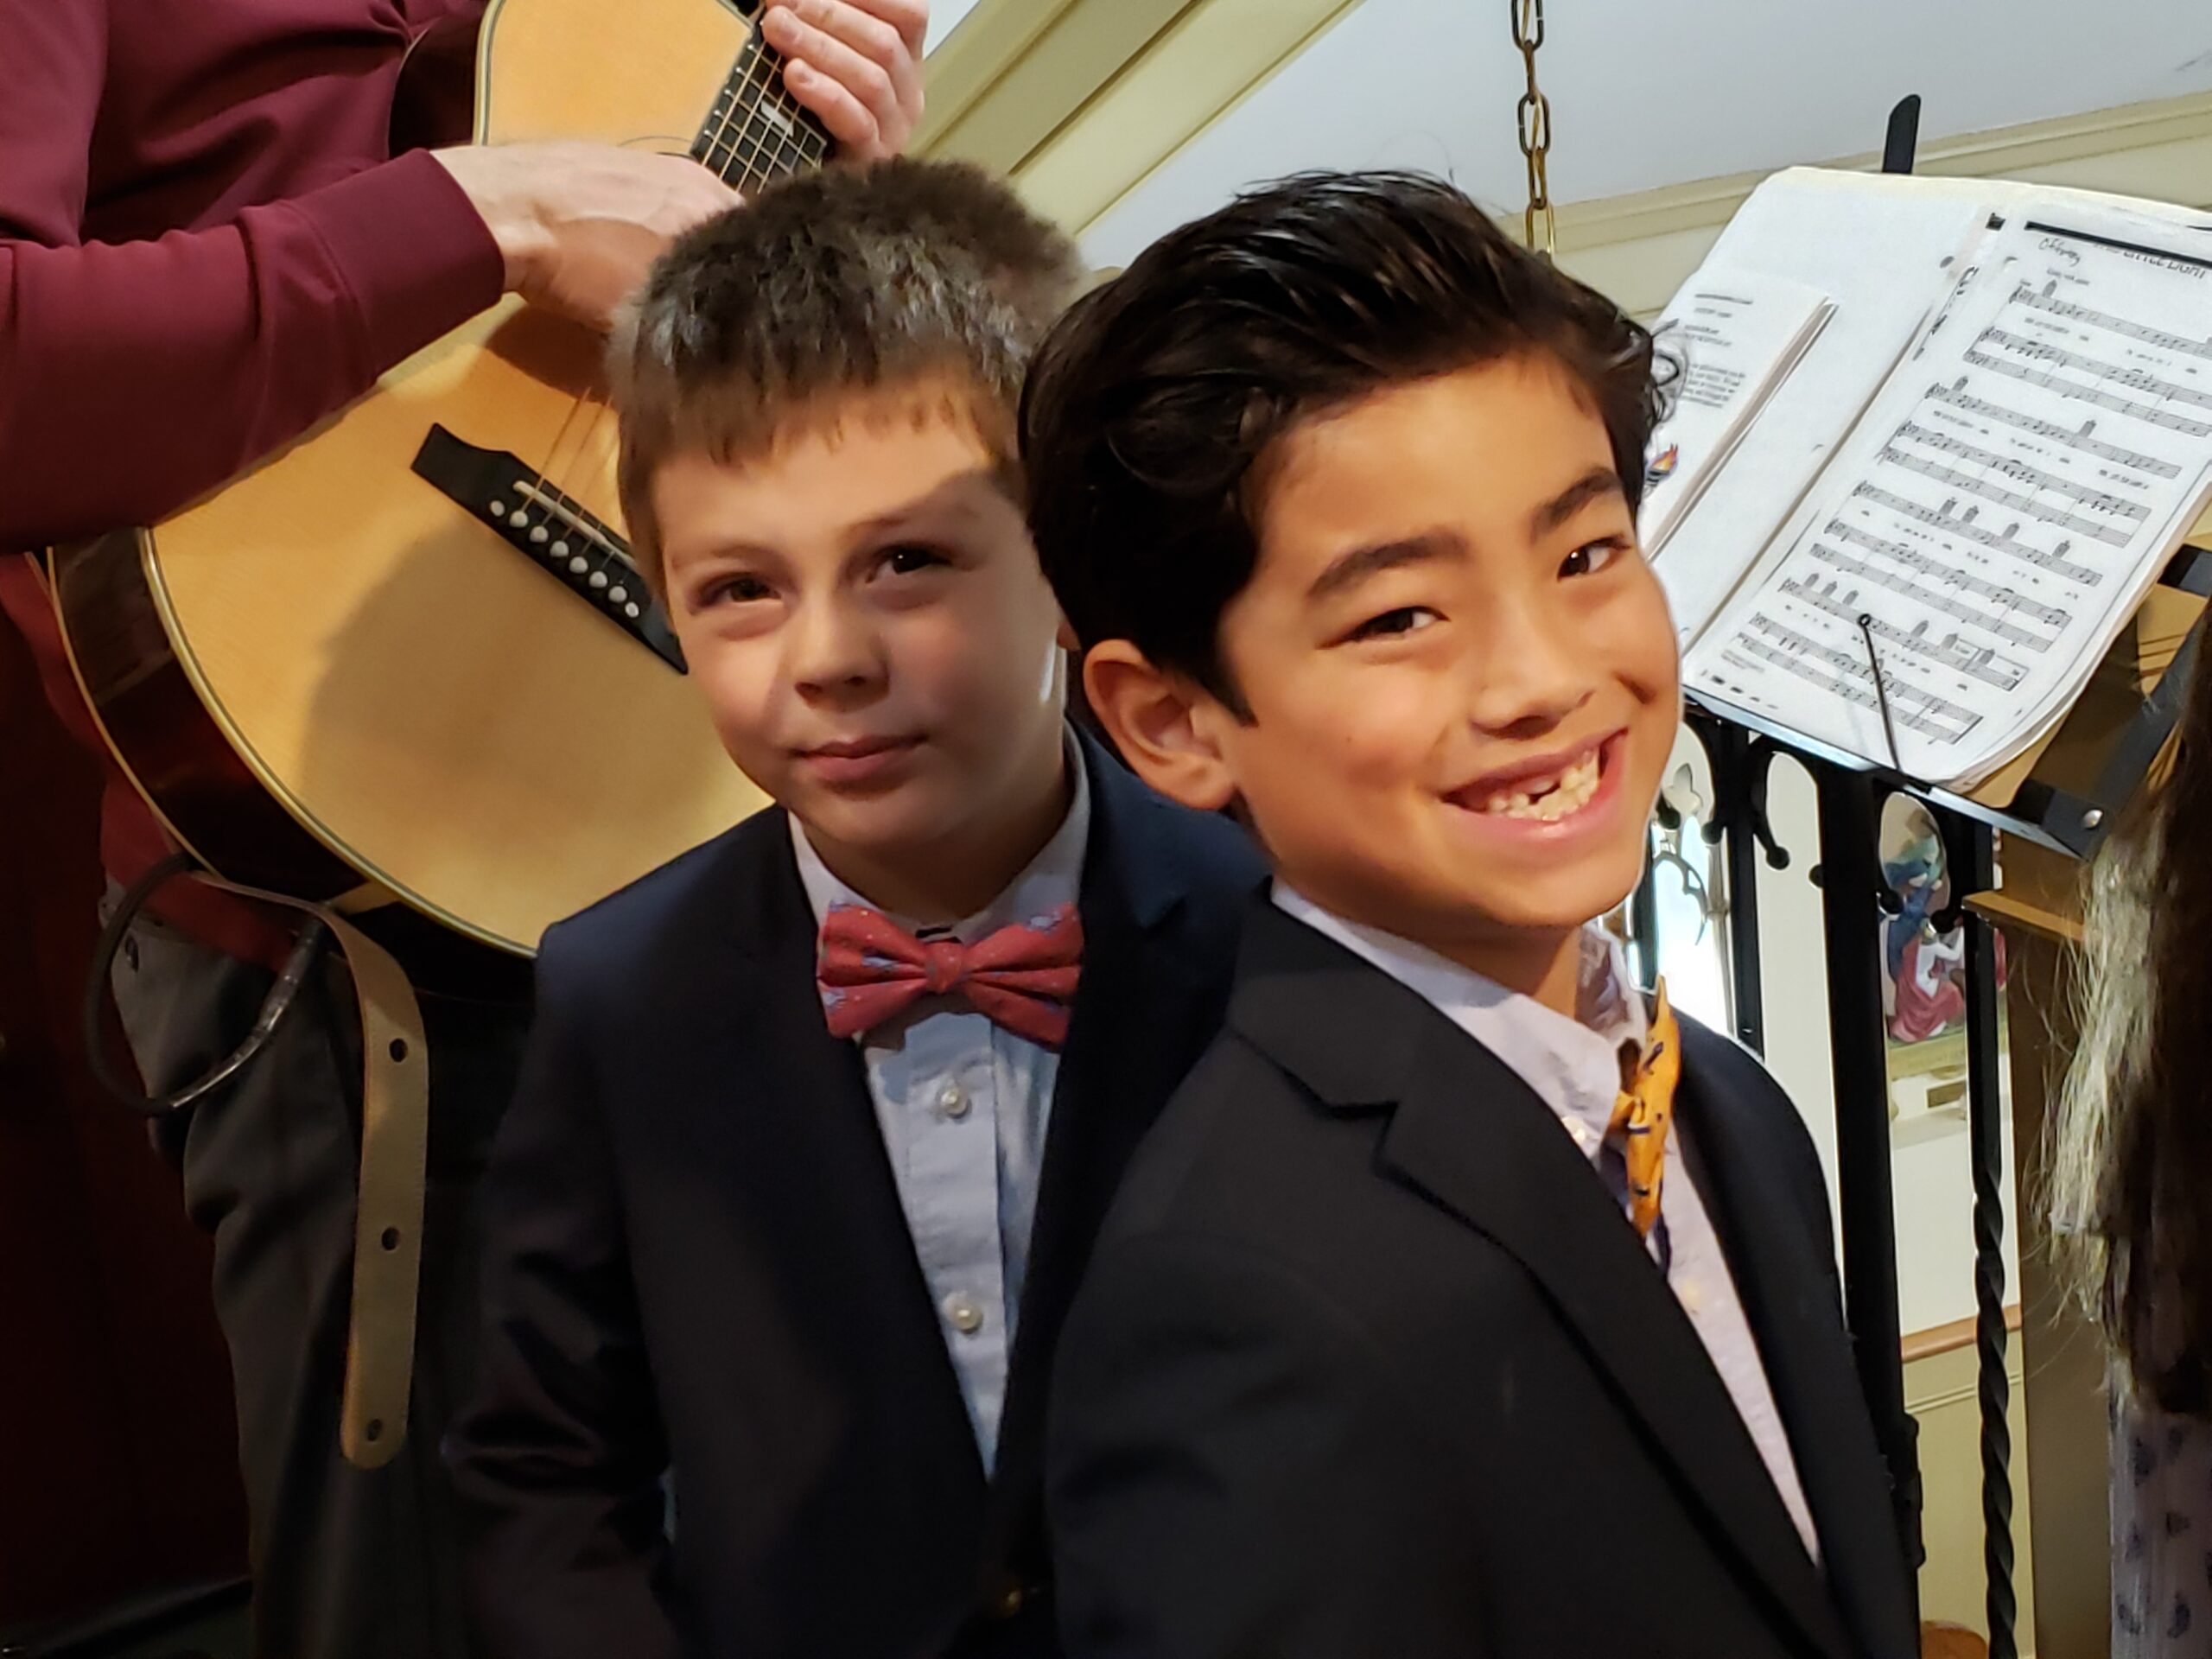 Our Lady of the Hamptons School students Bode Tiska and Leo Caruso sang in the first grade choir at the First Communion ceremony on May 7. COURTESY OUR LADY OF THE HAMPTONS SCHOOL